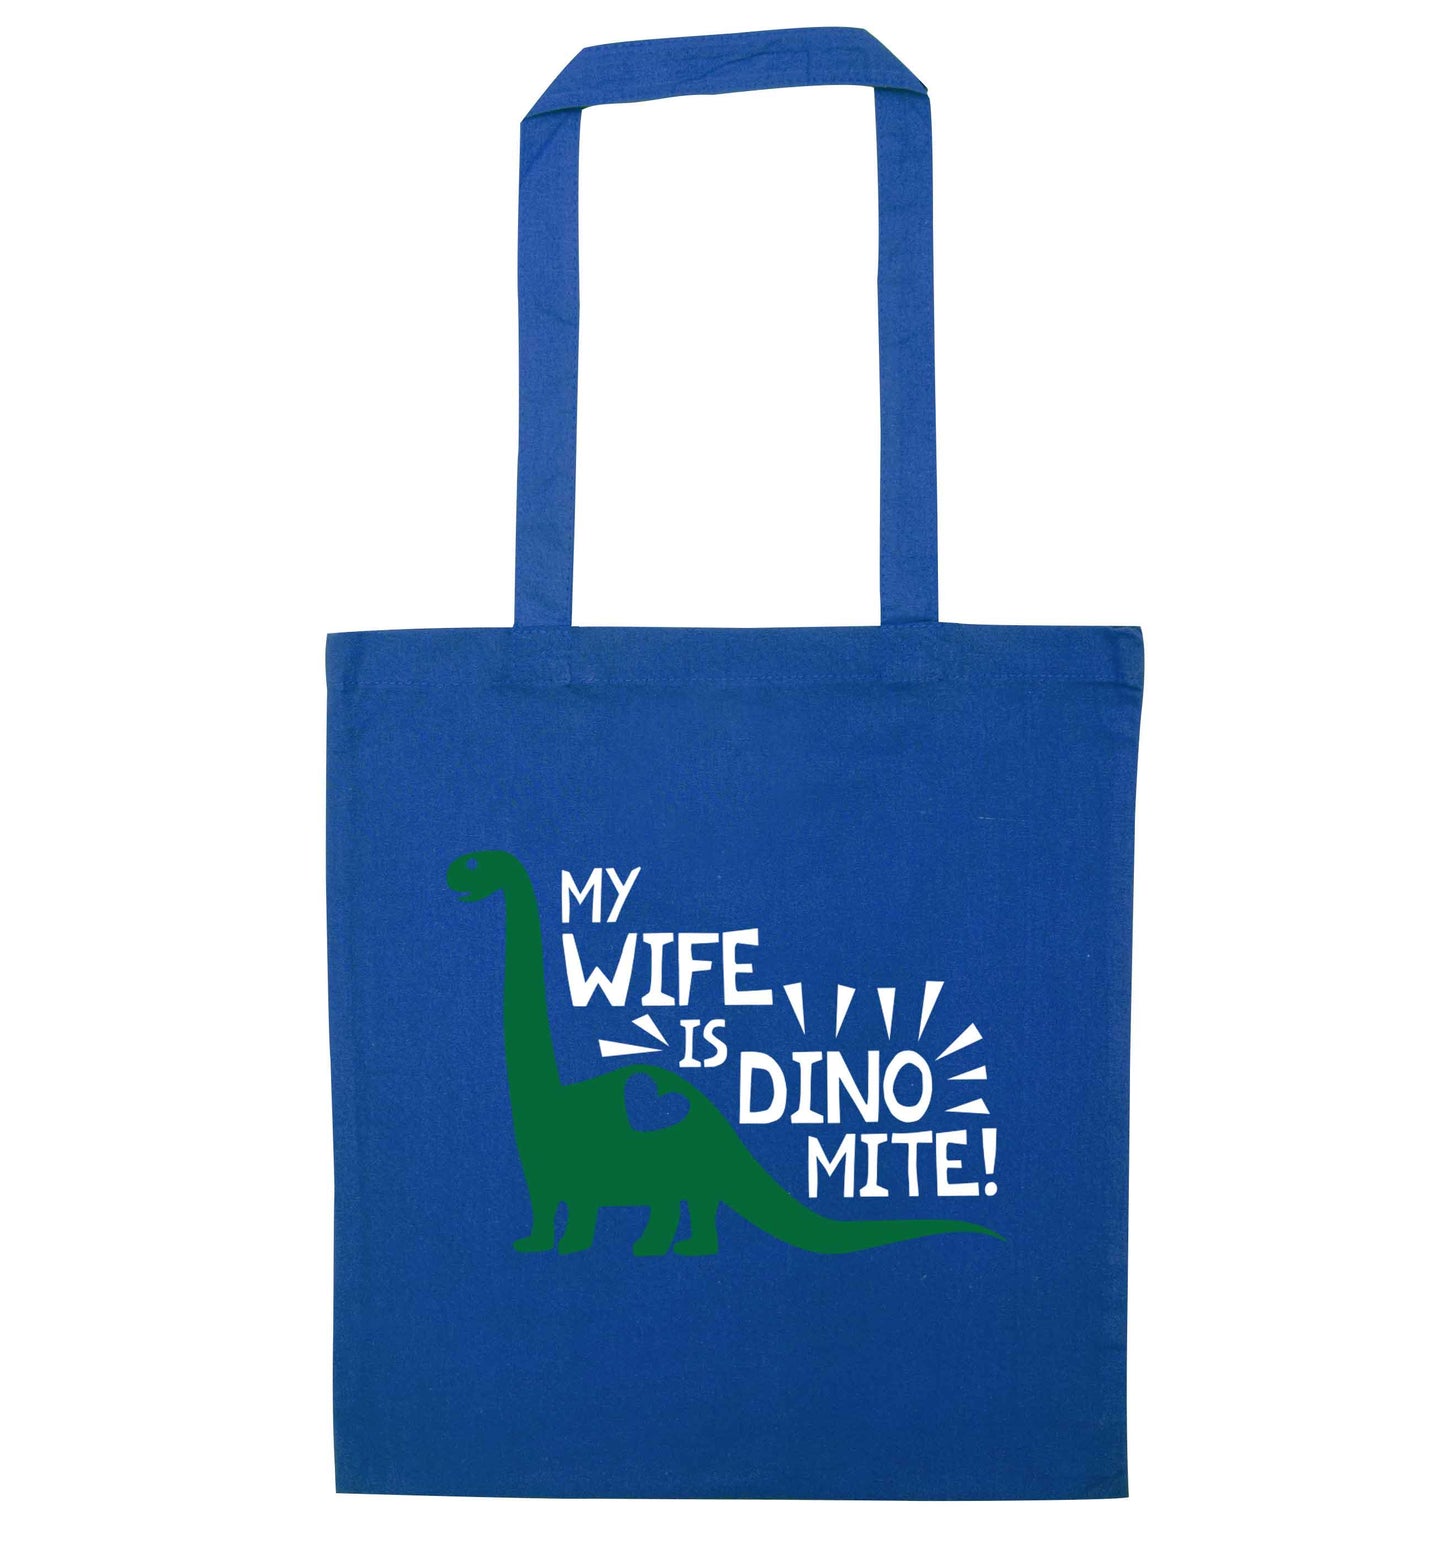 My wife is dinomite! blue tote bag